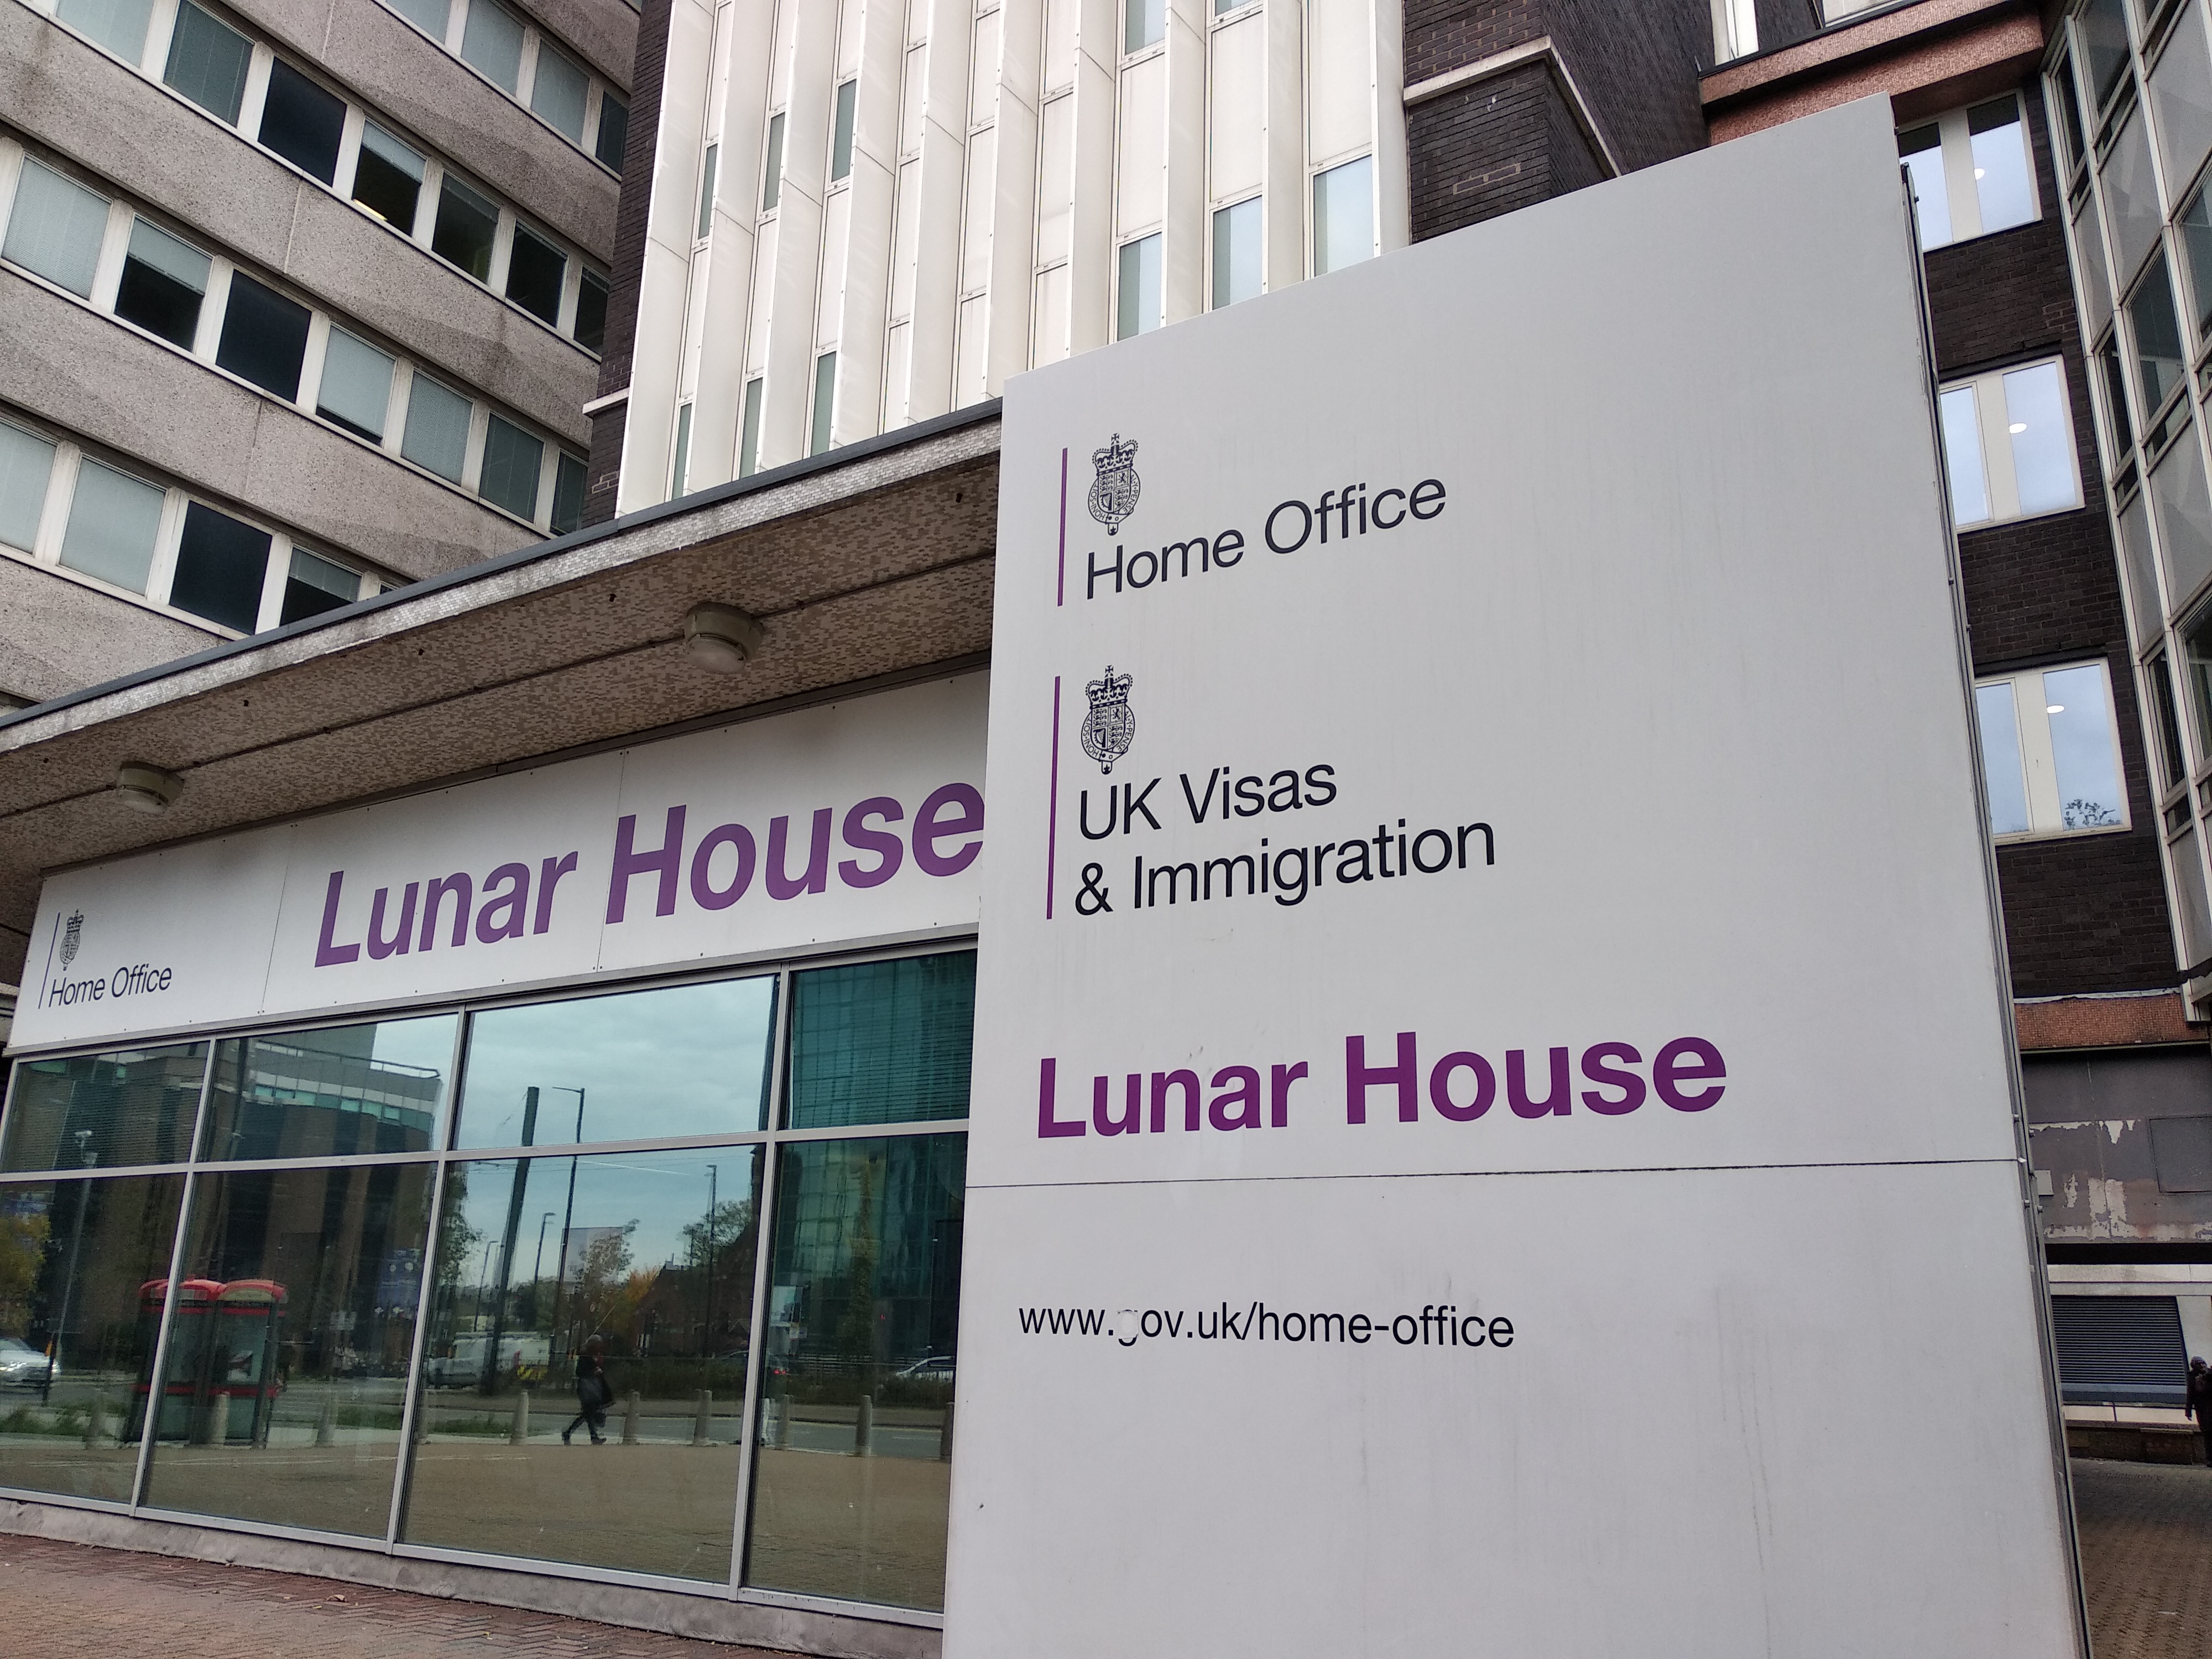 The Home Office's headquarters in Lunar House, Croydon.